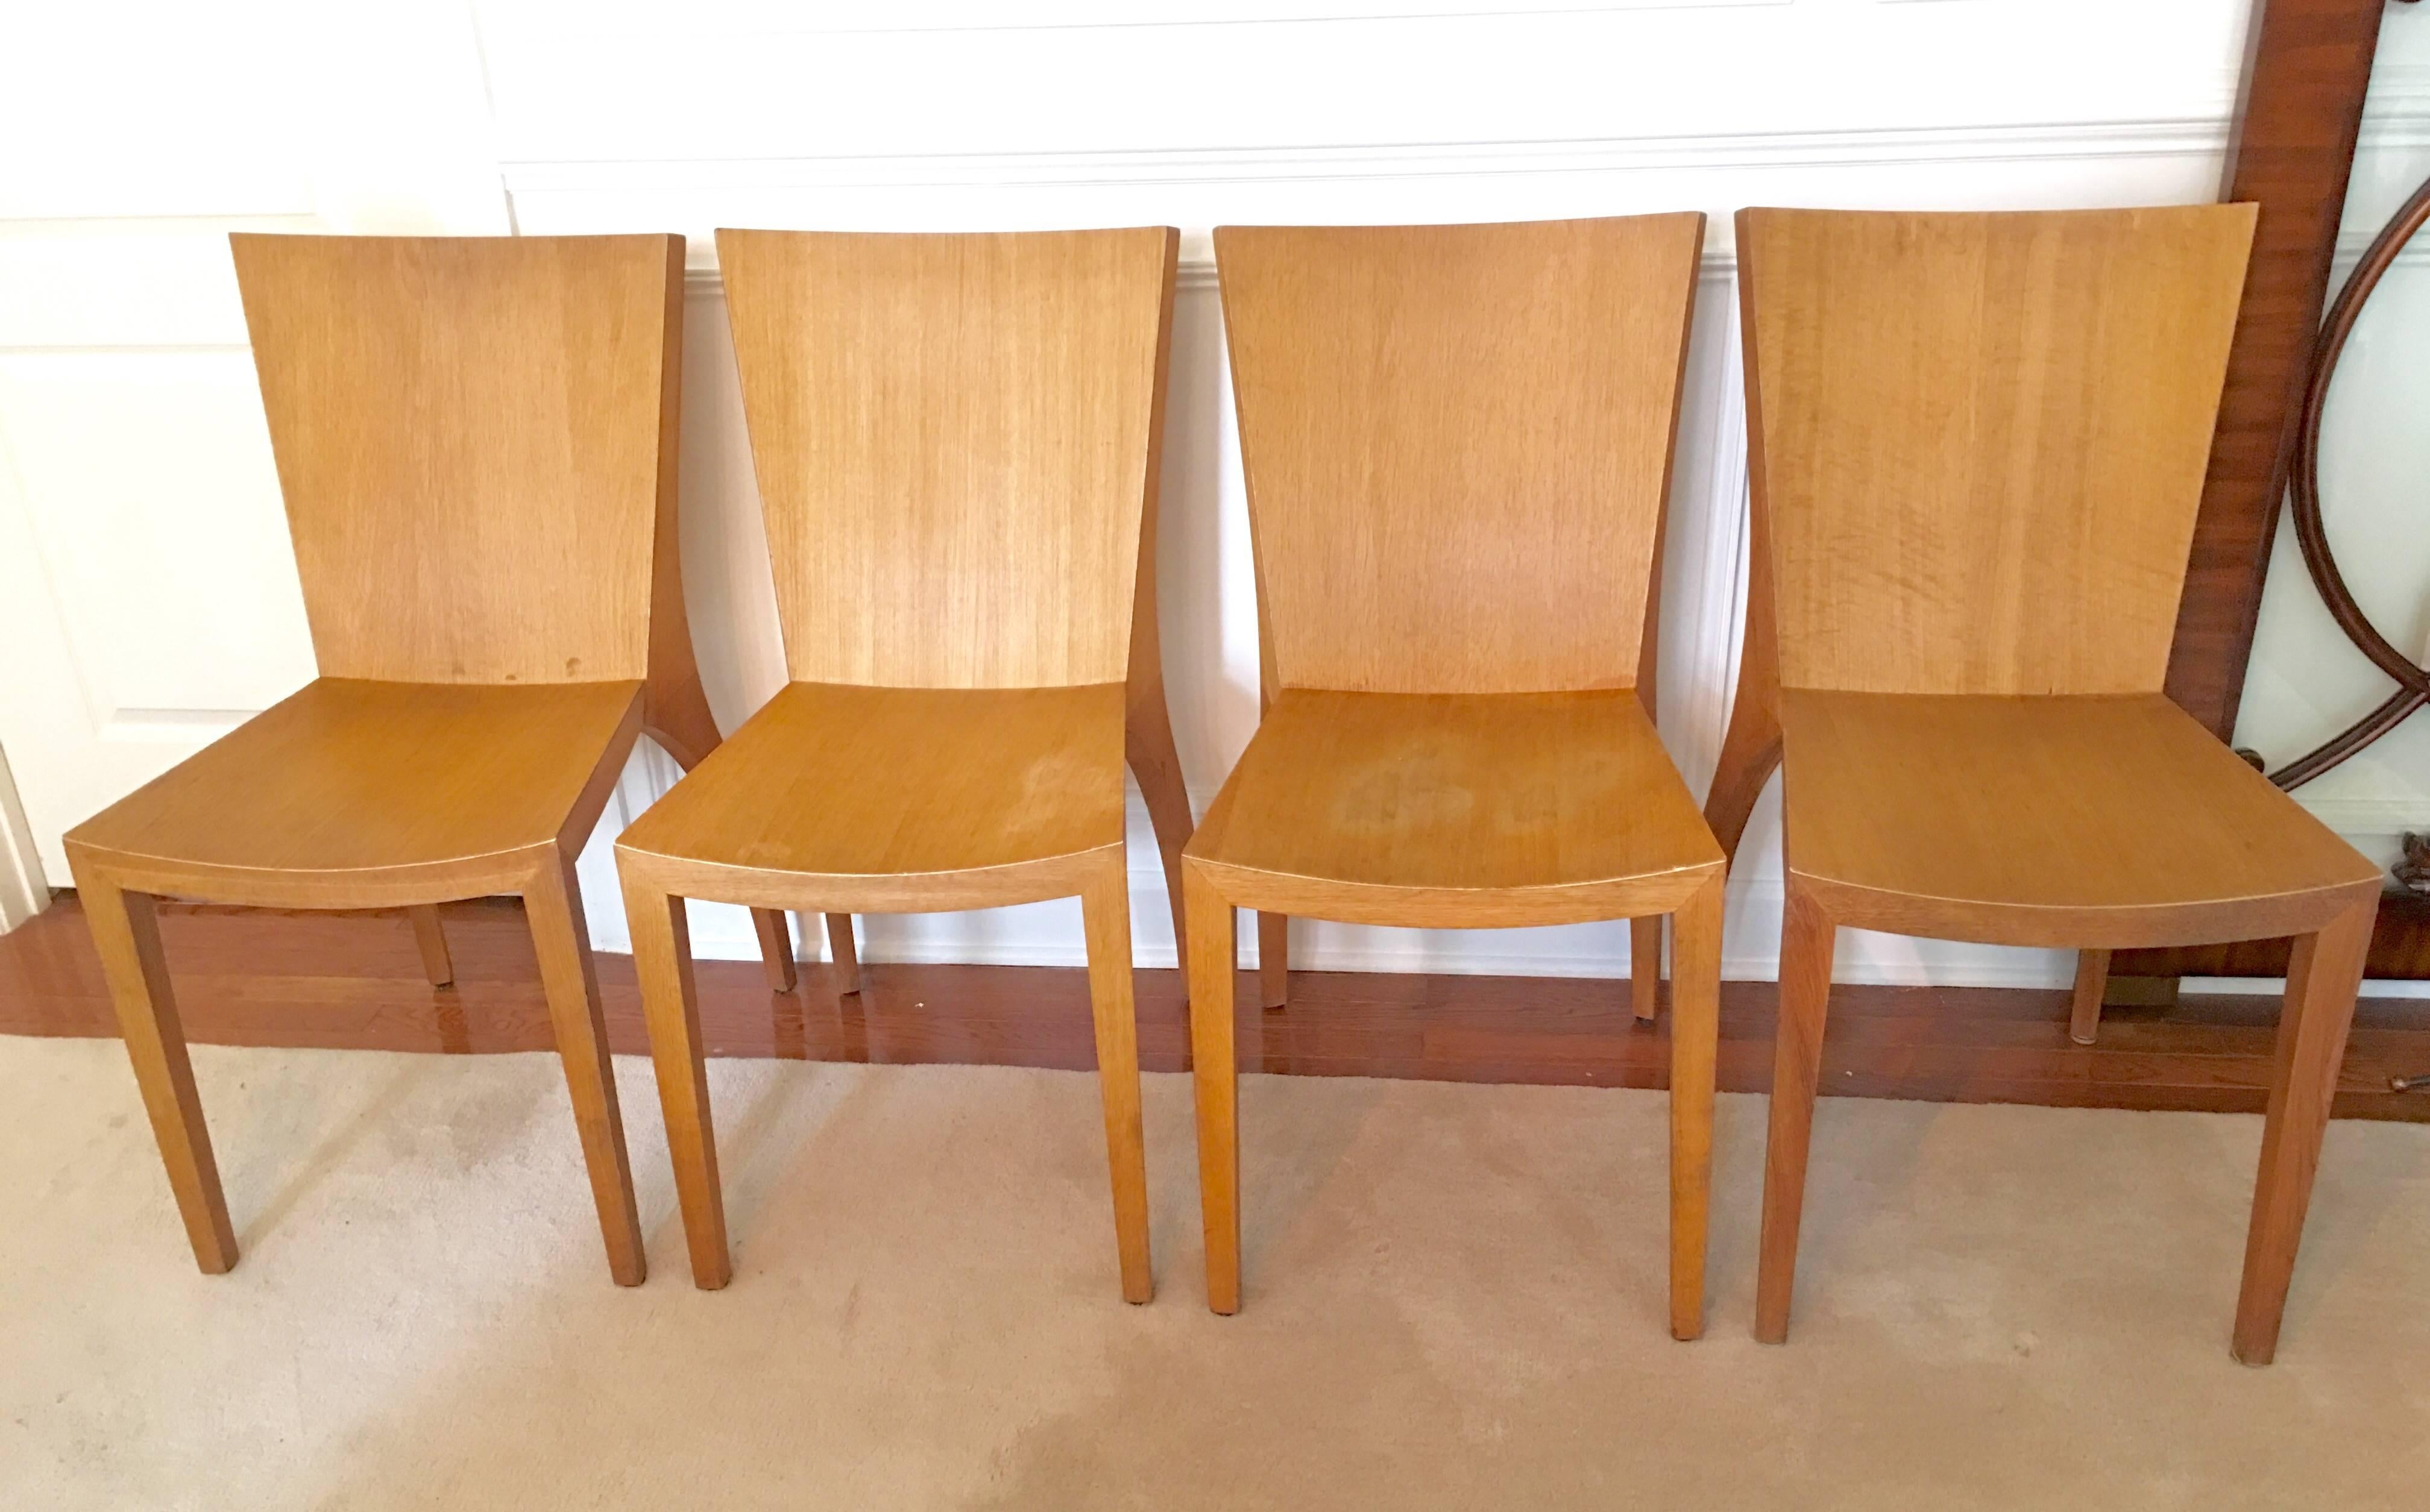 Very stylish set of four oak dining chairs in the style Jean-Michel Frank from the 1940s. The pair of hind legs on these chairs look like they are ready to prance. Gorgeous shape. They look fabulous with fur seat cushions.